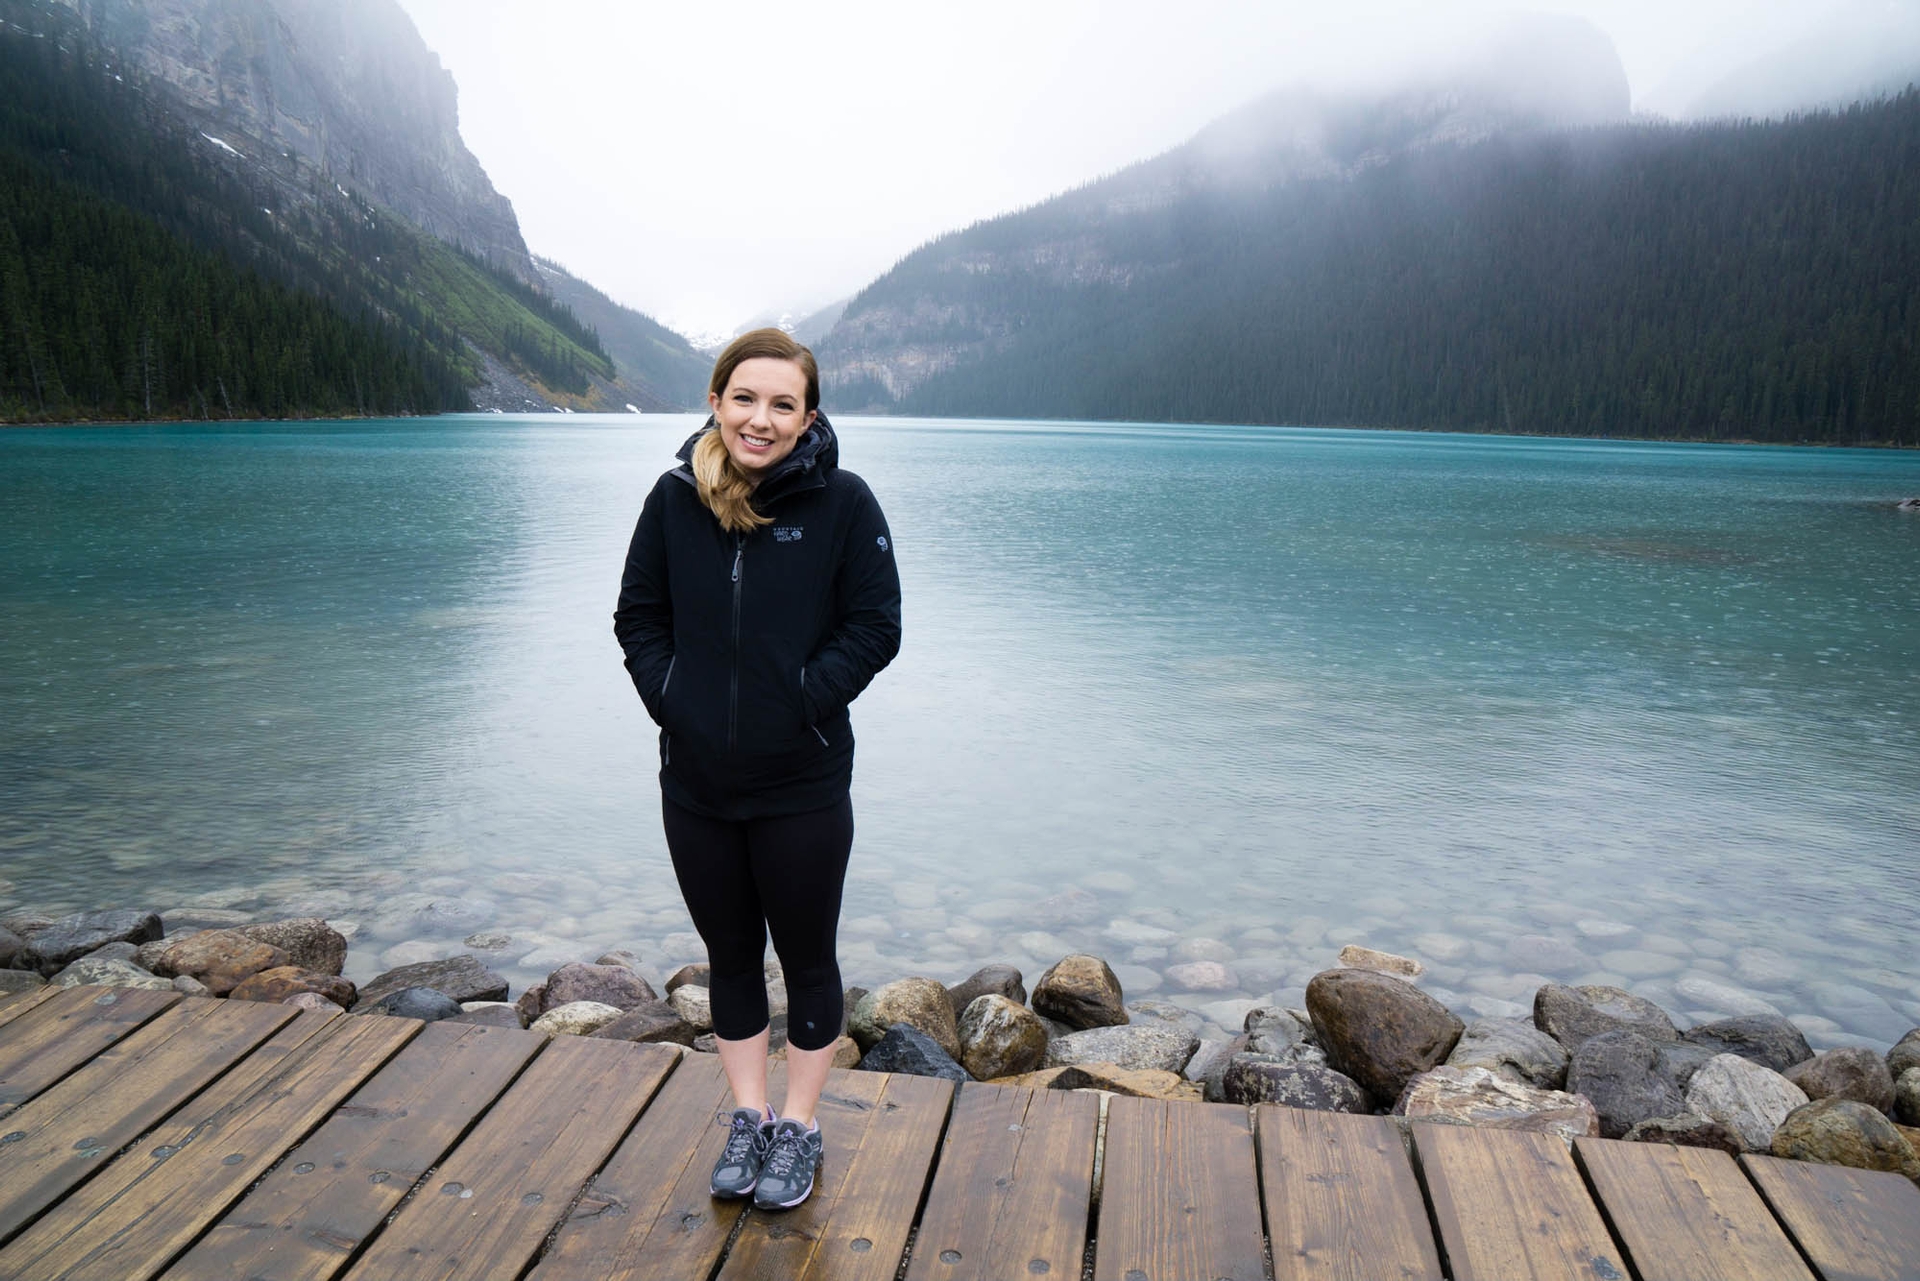 Banff, Our Canadian Road Trip